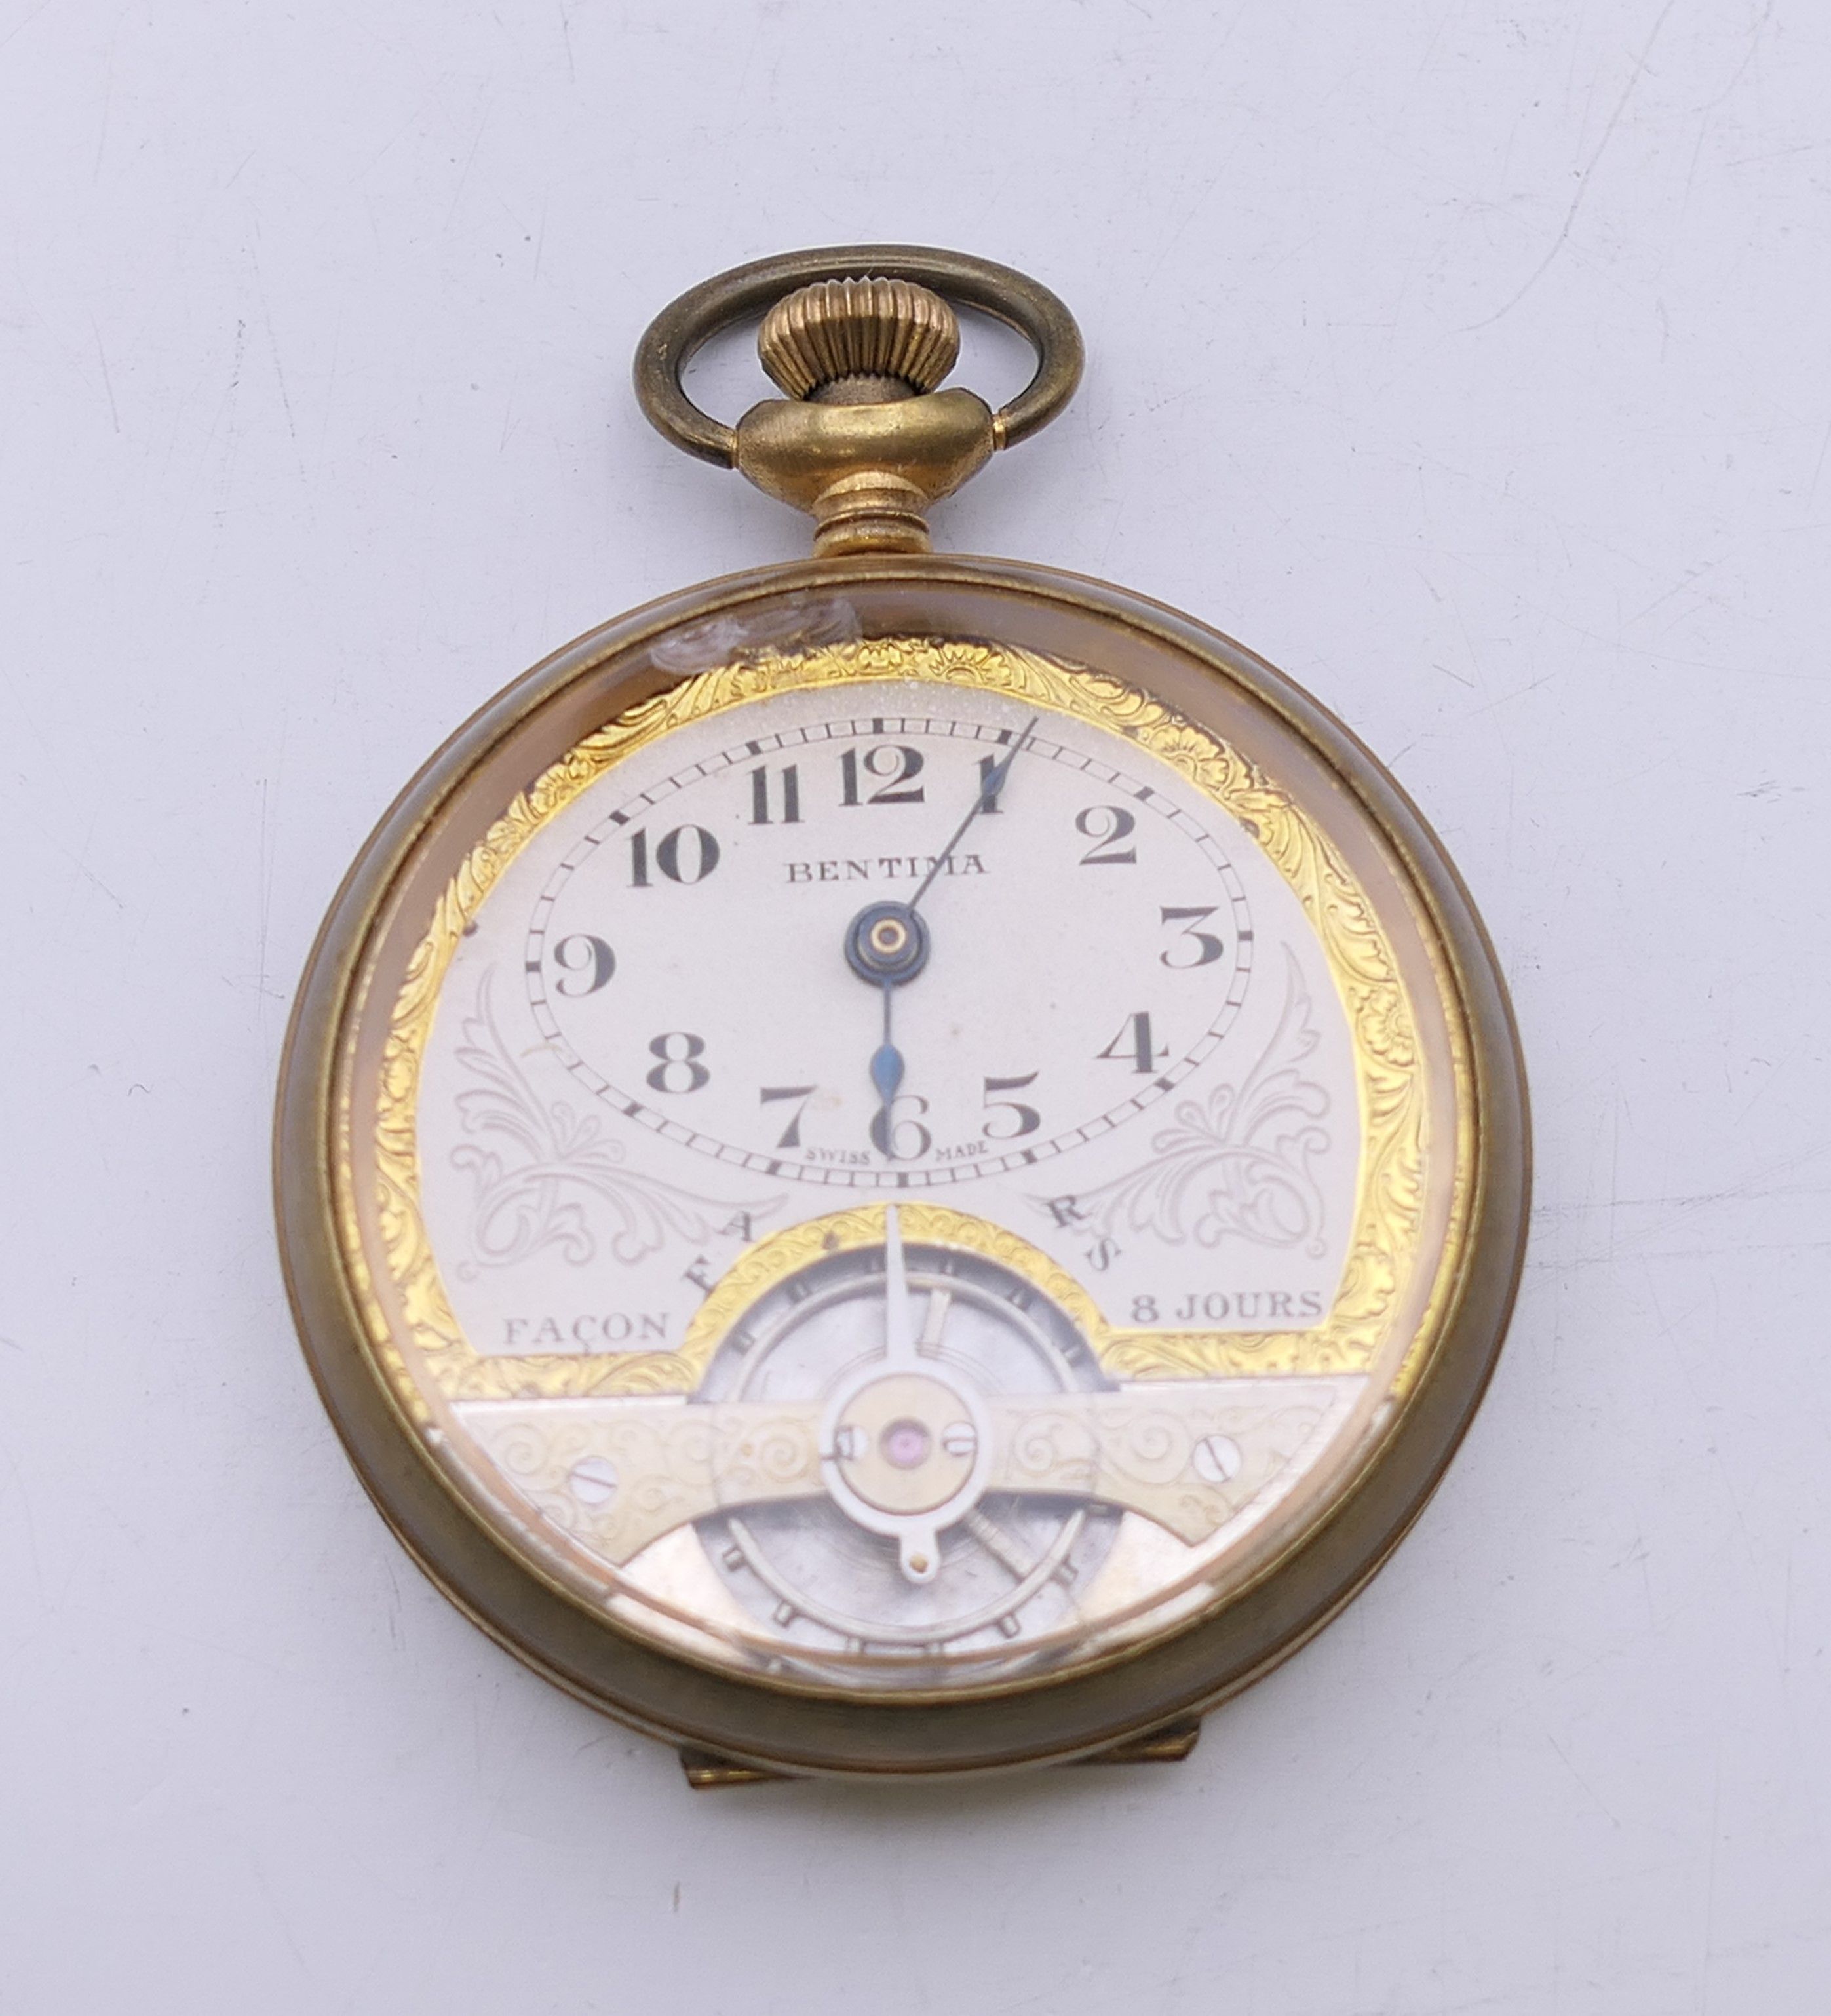 Six pocket watches, including The Express Watch Lever Company J G Graves, Bentima, Waltham, Elgin, - Image 5 of 15